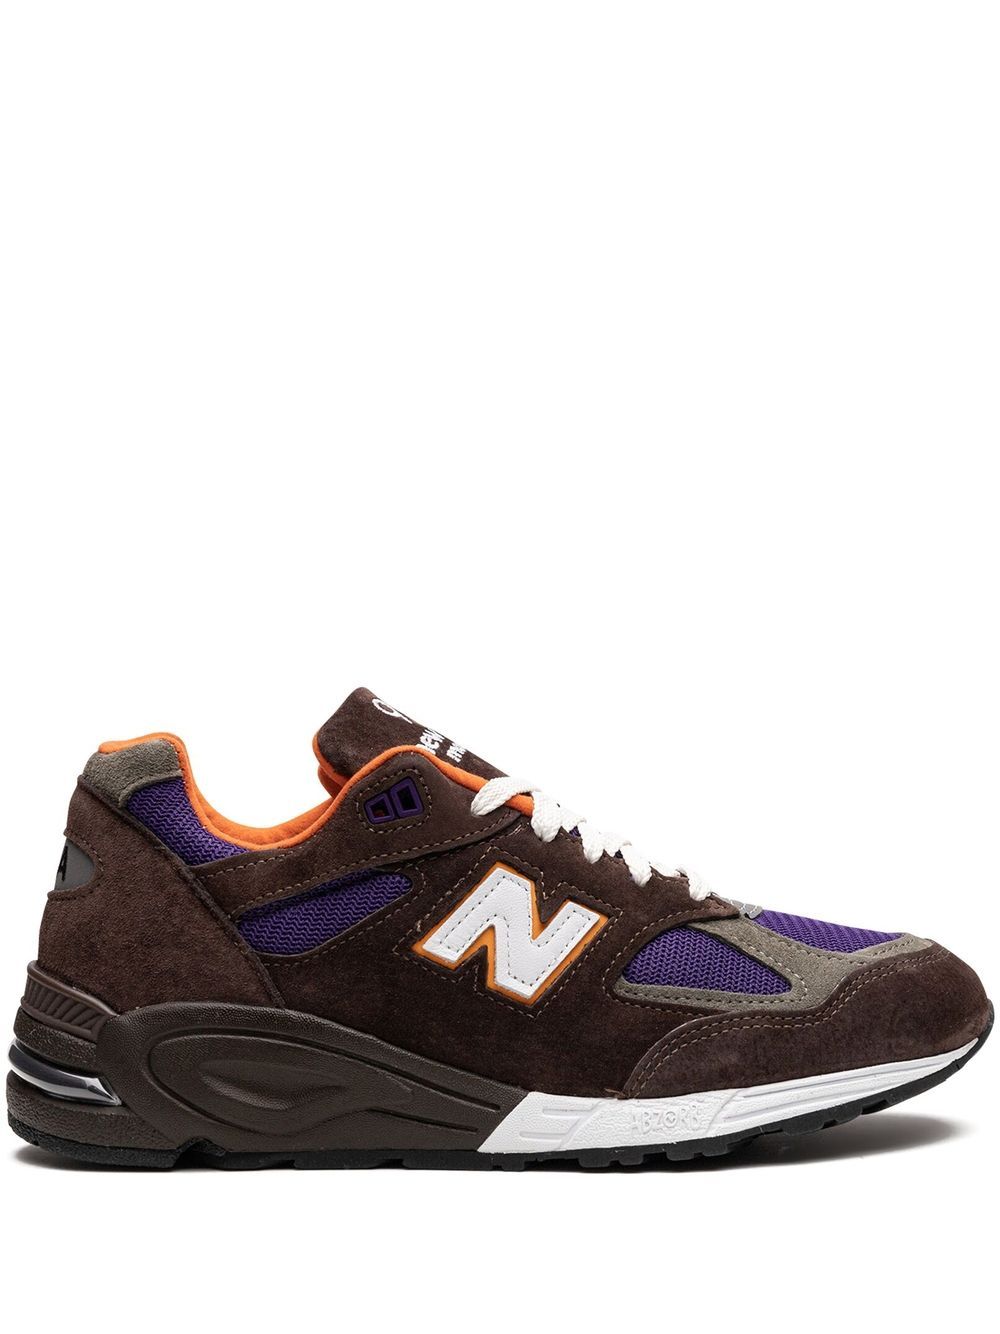 Shop New Balance Made In Usa 990v2 "brown/orange/purple" Sneakers